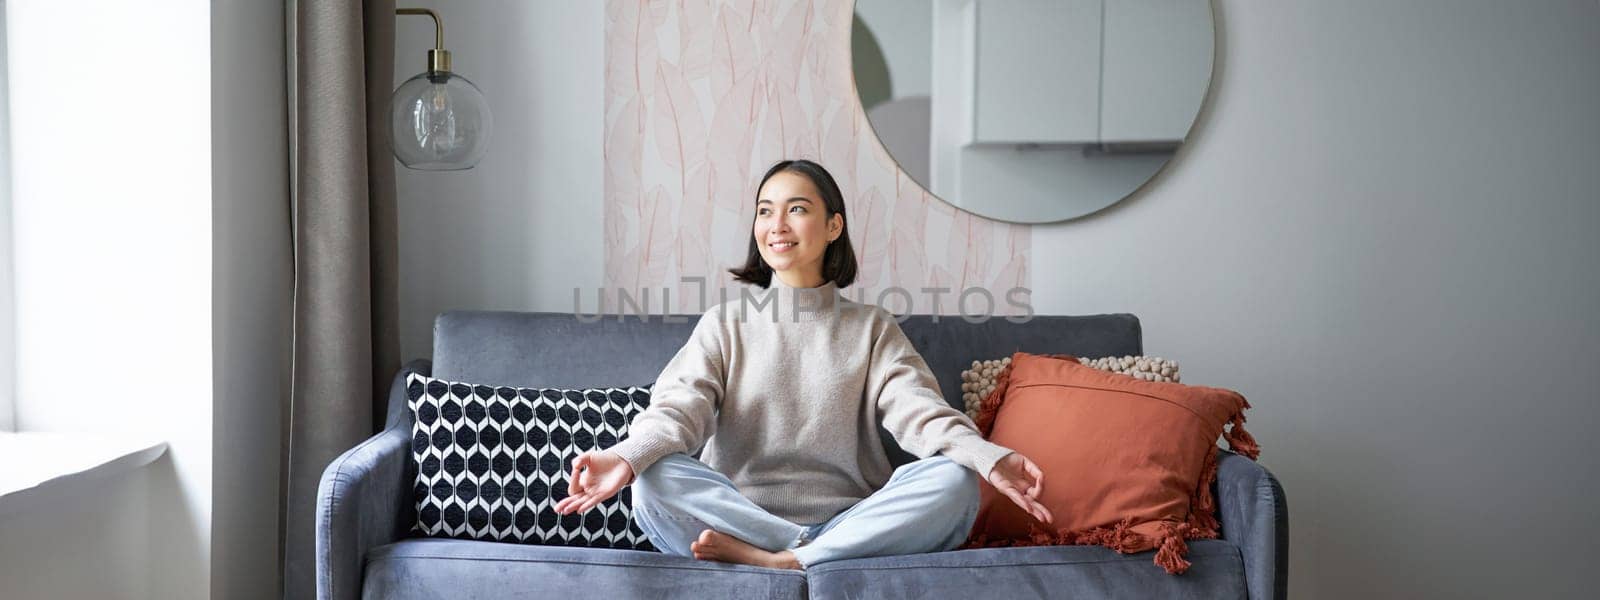 Relaxation and patience. Smiling young asian woman in cozy room, sitting on sofa and meditating, doing yoga mindfulness training.